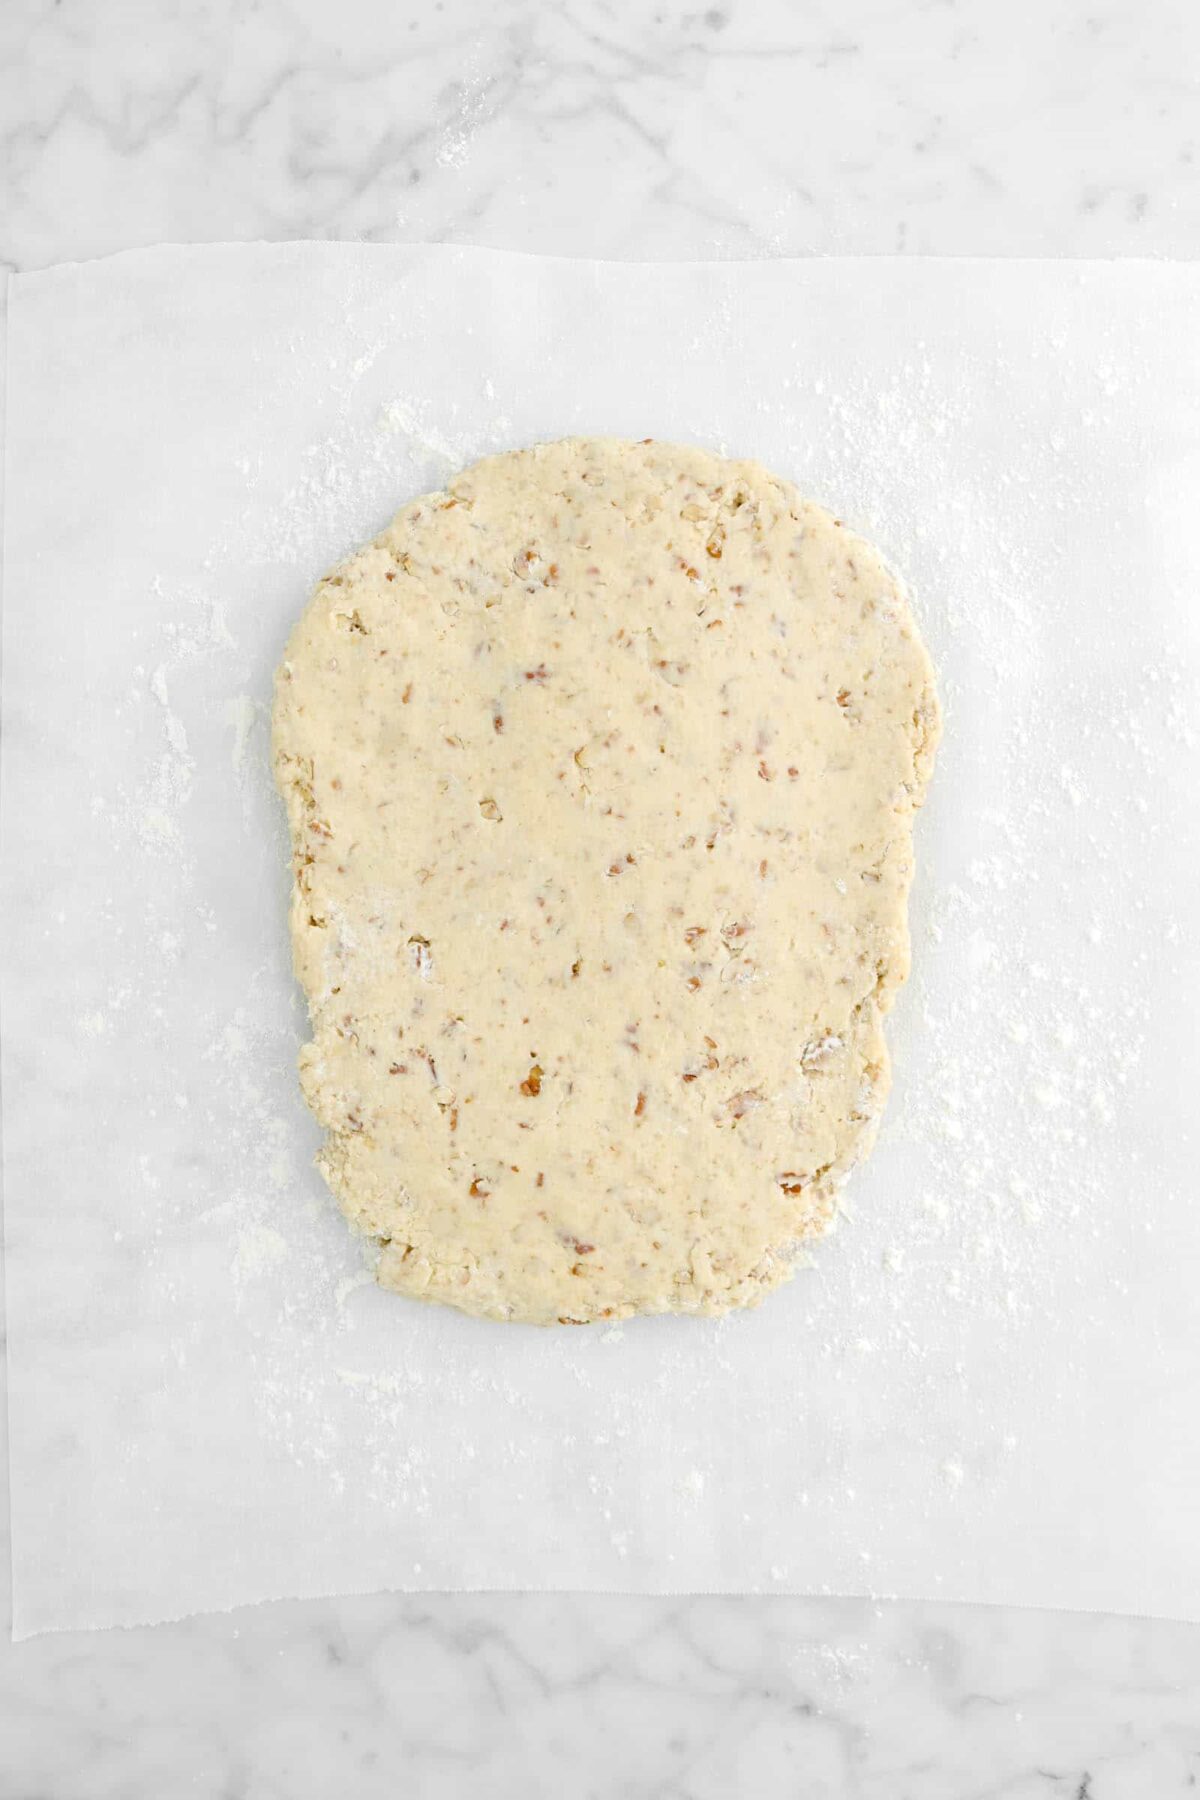 scone dough rolled out into an oval